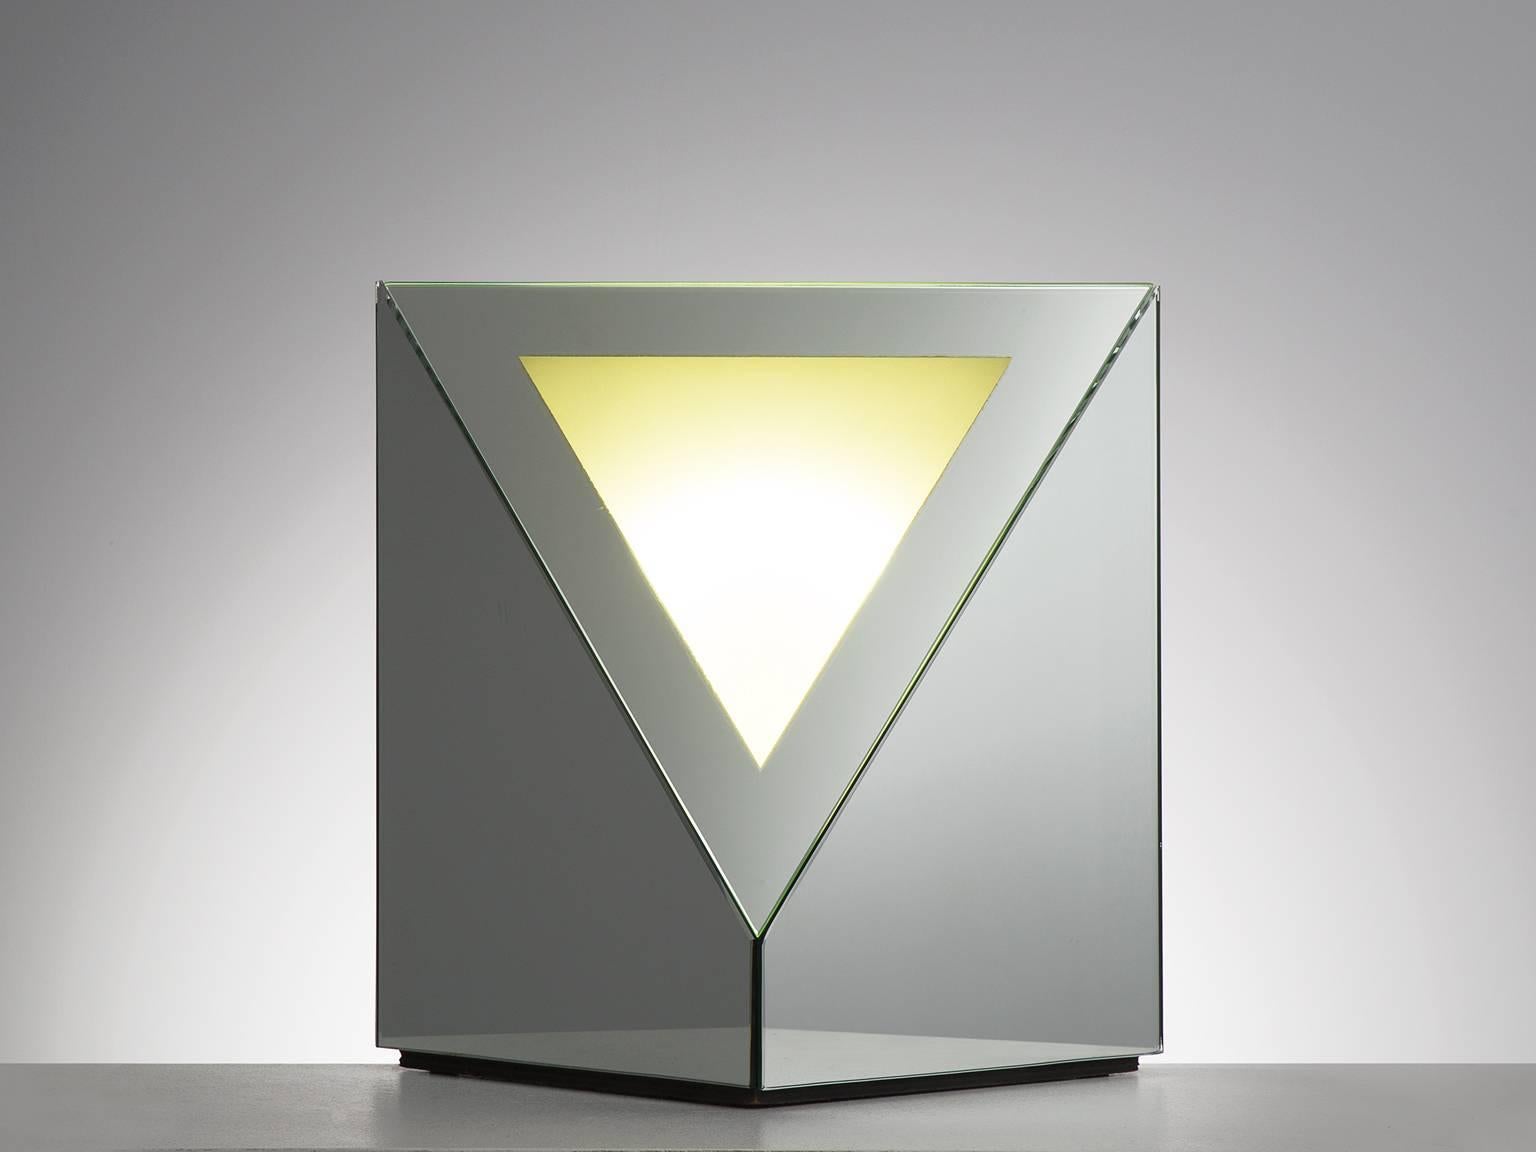 Nanda Vigo, table lamp 'Trigger of the Space', mirror, glass, Italy, 1974.

This lamp and sculpture is designed by Nanda Vigo. The piece, titled 'Trigger of Space' is a design that is quintessential for Vigo. It features geometric, minimalist